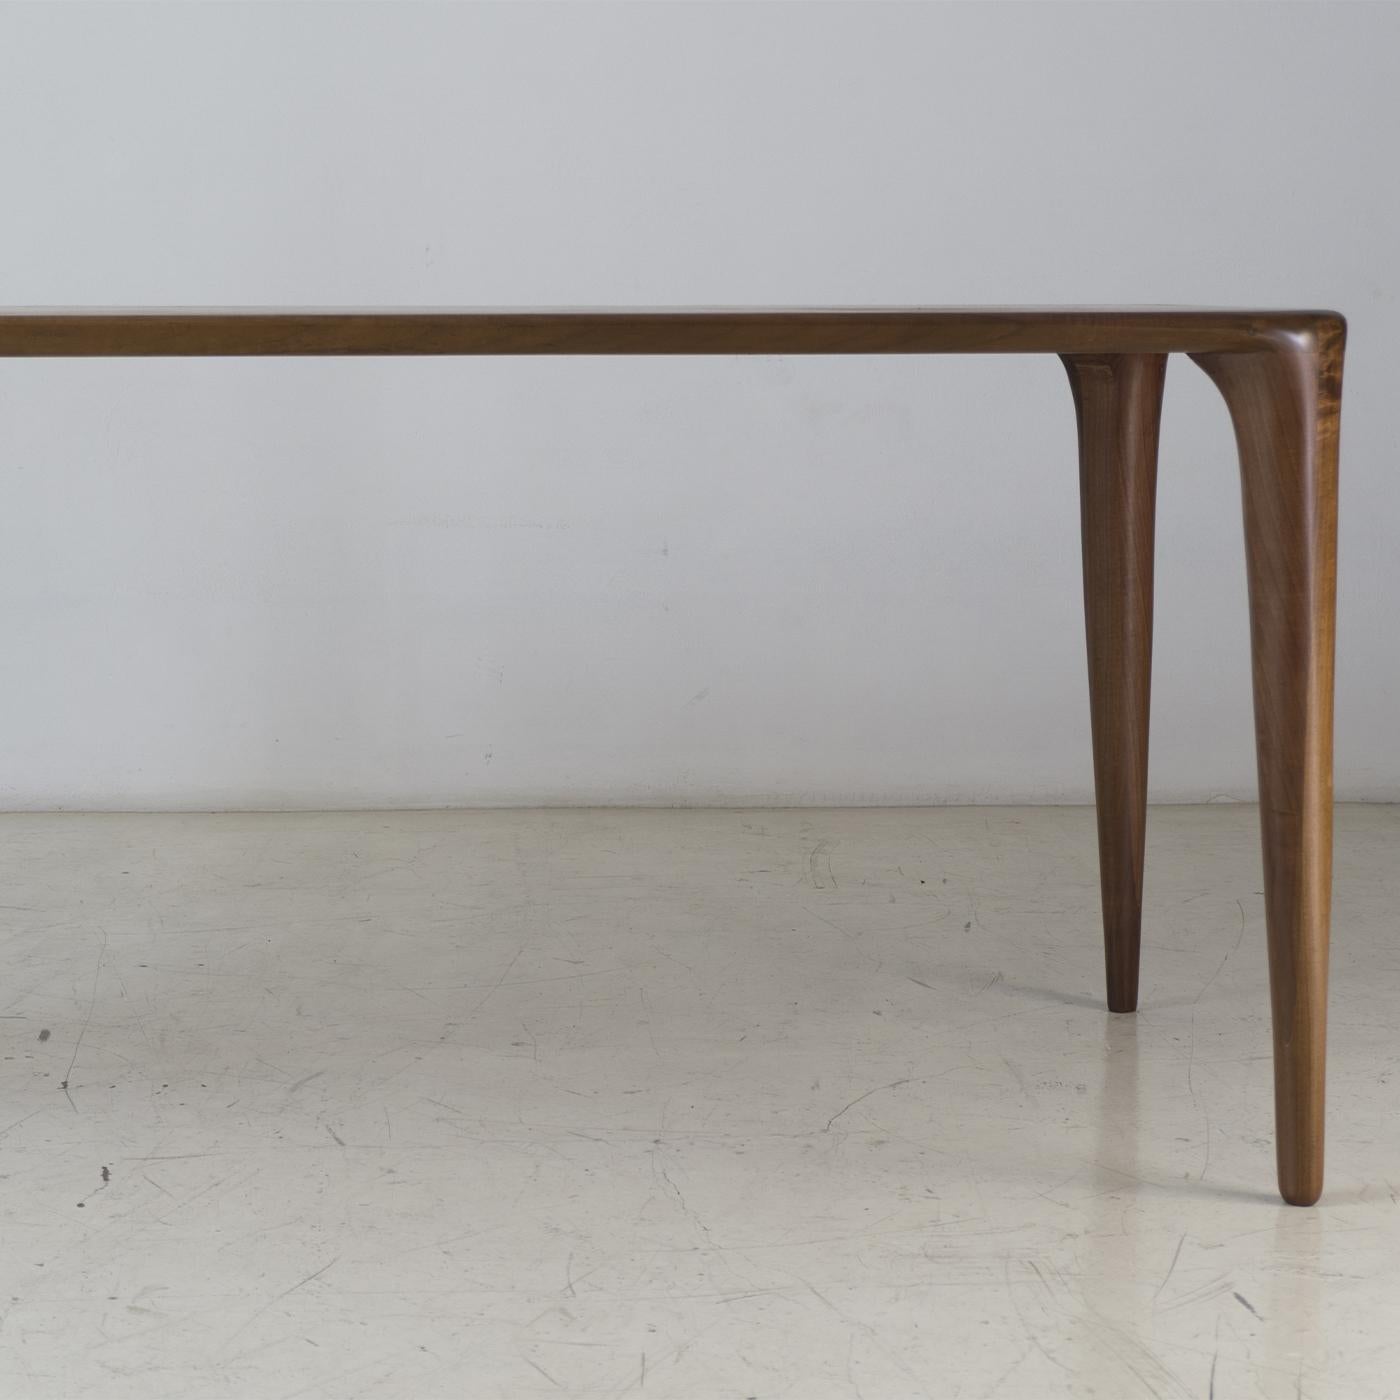 Truly one of a kind, this table is part of the S collection, characterized by smooth surfaces, gentle curves and the elegant joints between the table's legs and top. Crafted in the best solid Italian blonde walnut on the market, the table is further